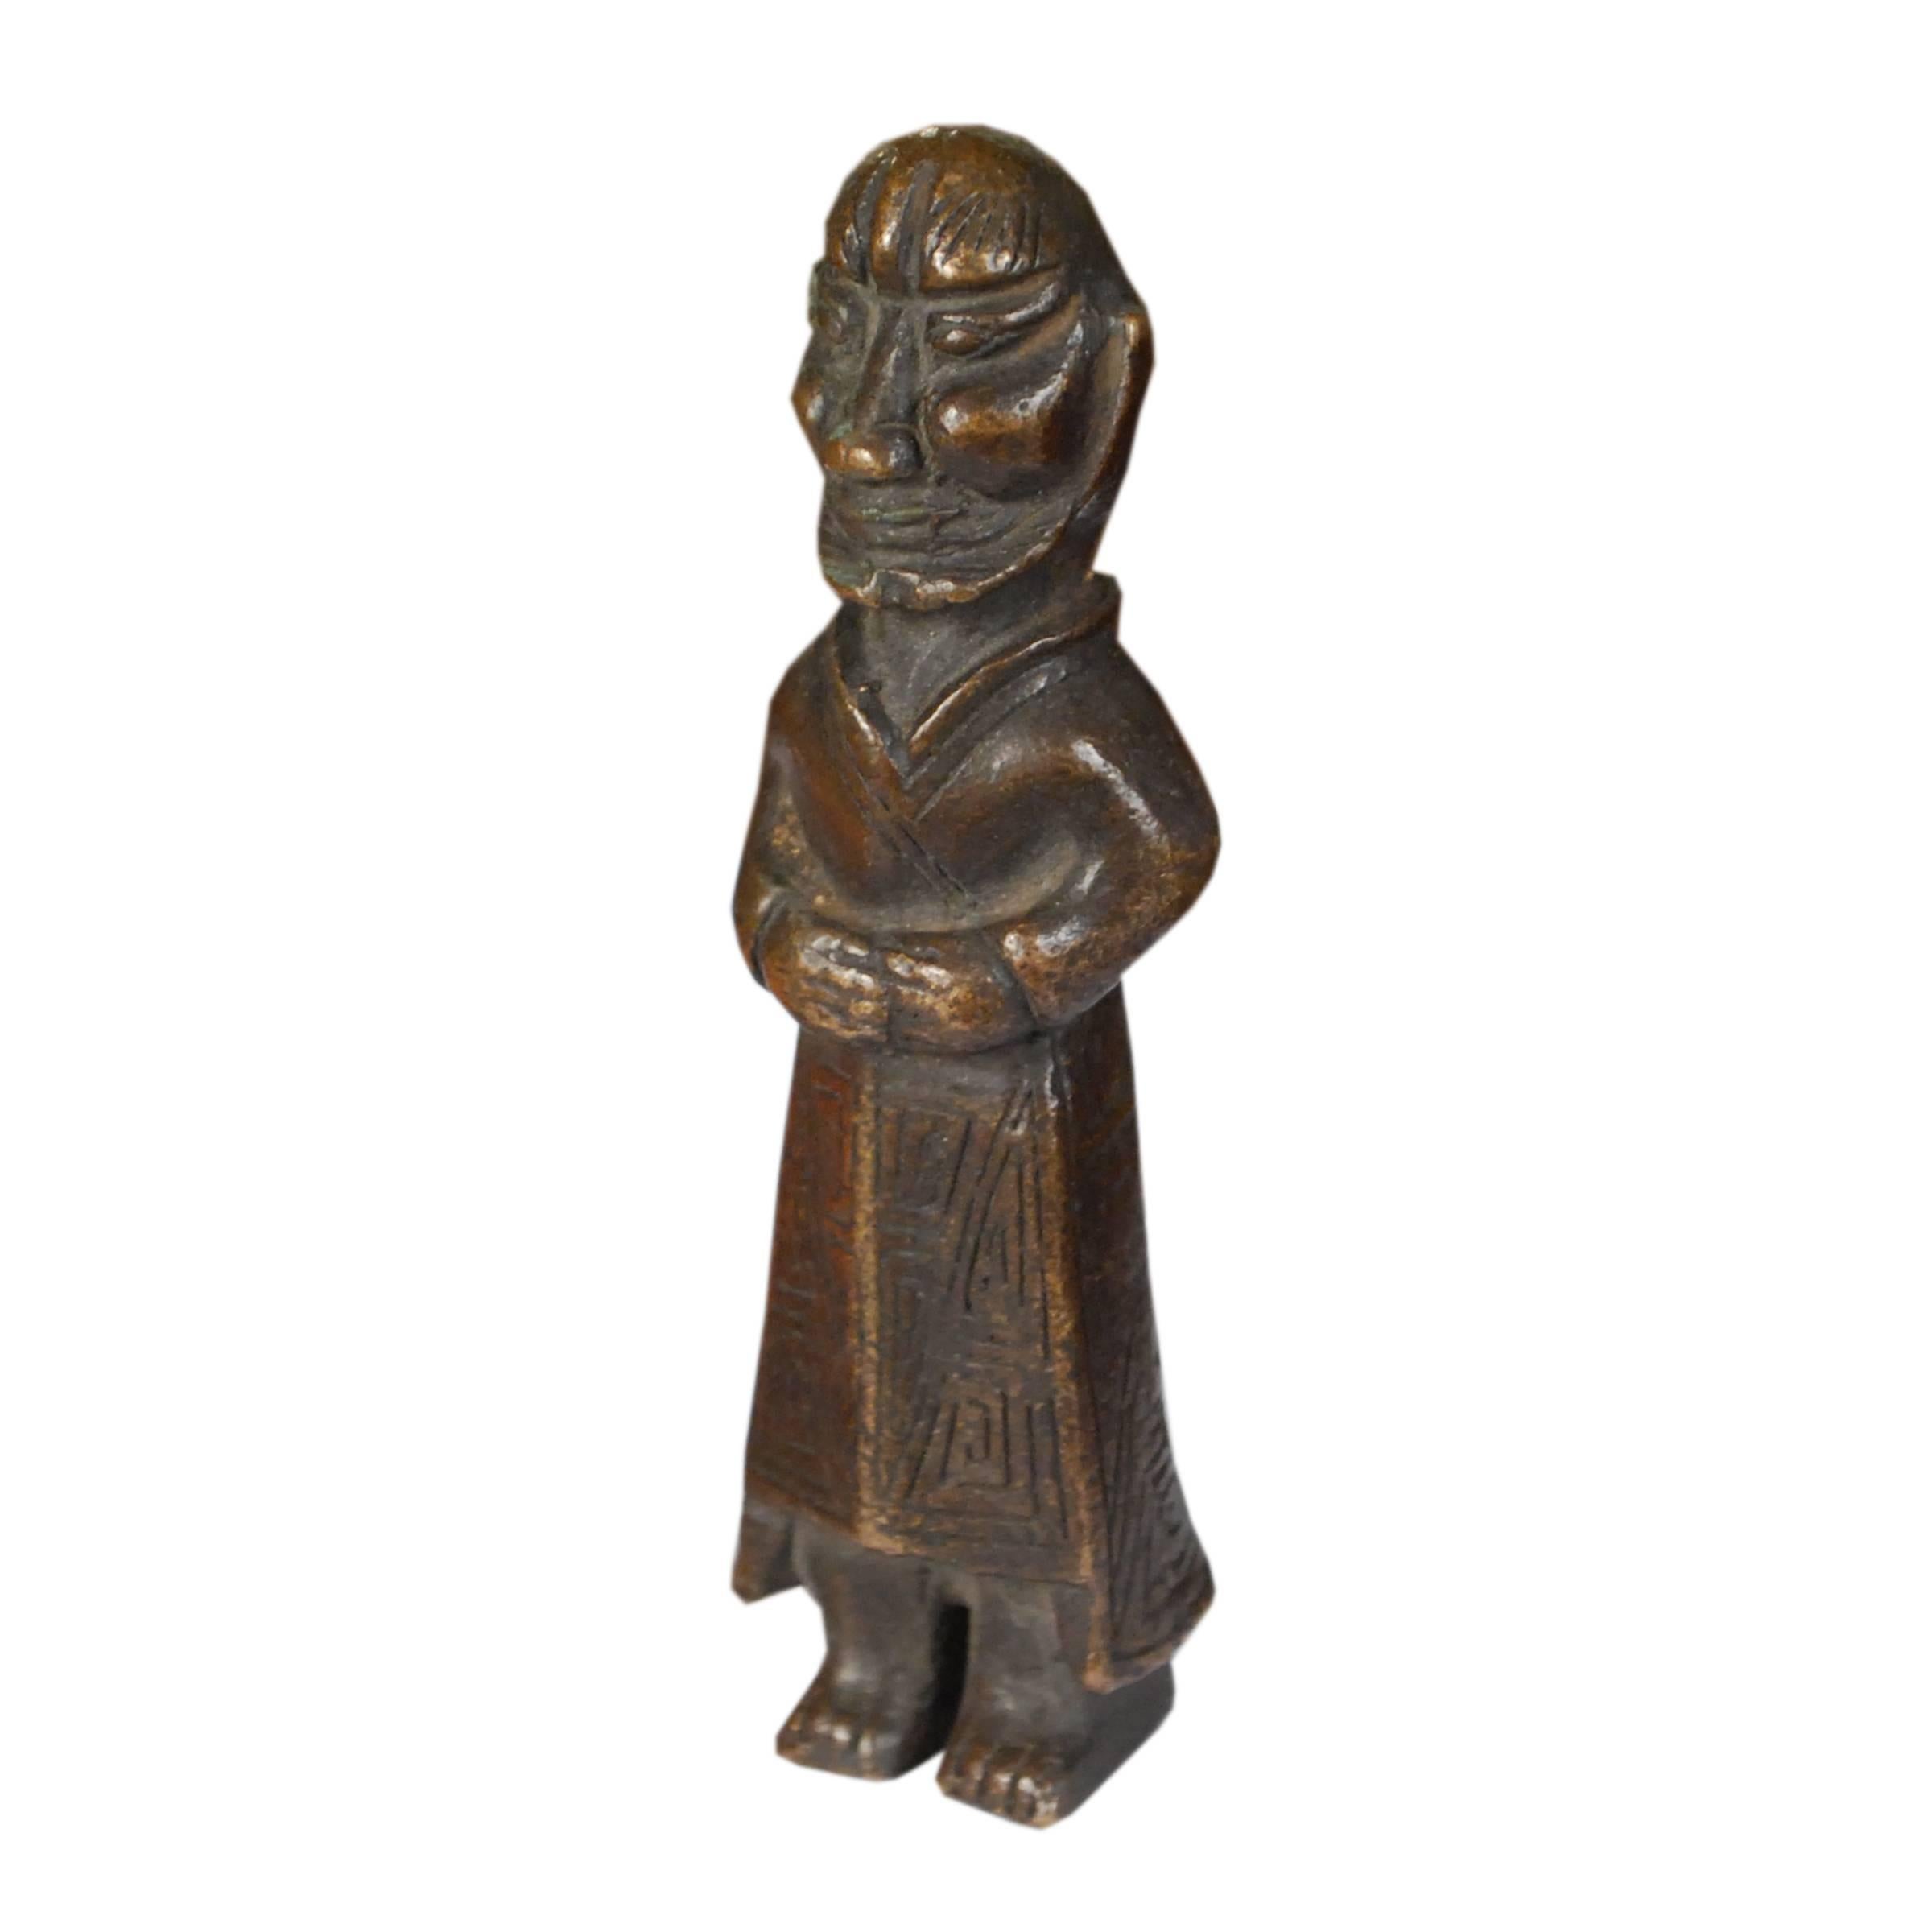 Meant to be tucked into a pocket as a charm, this tiny figure of a wise elder was kept close in hand as a talisman for wisdom, good luck, and protection. Cast of bronze in Shanxi province in the mid-19th century, this charm has gained a lovely